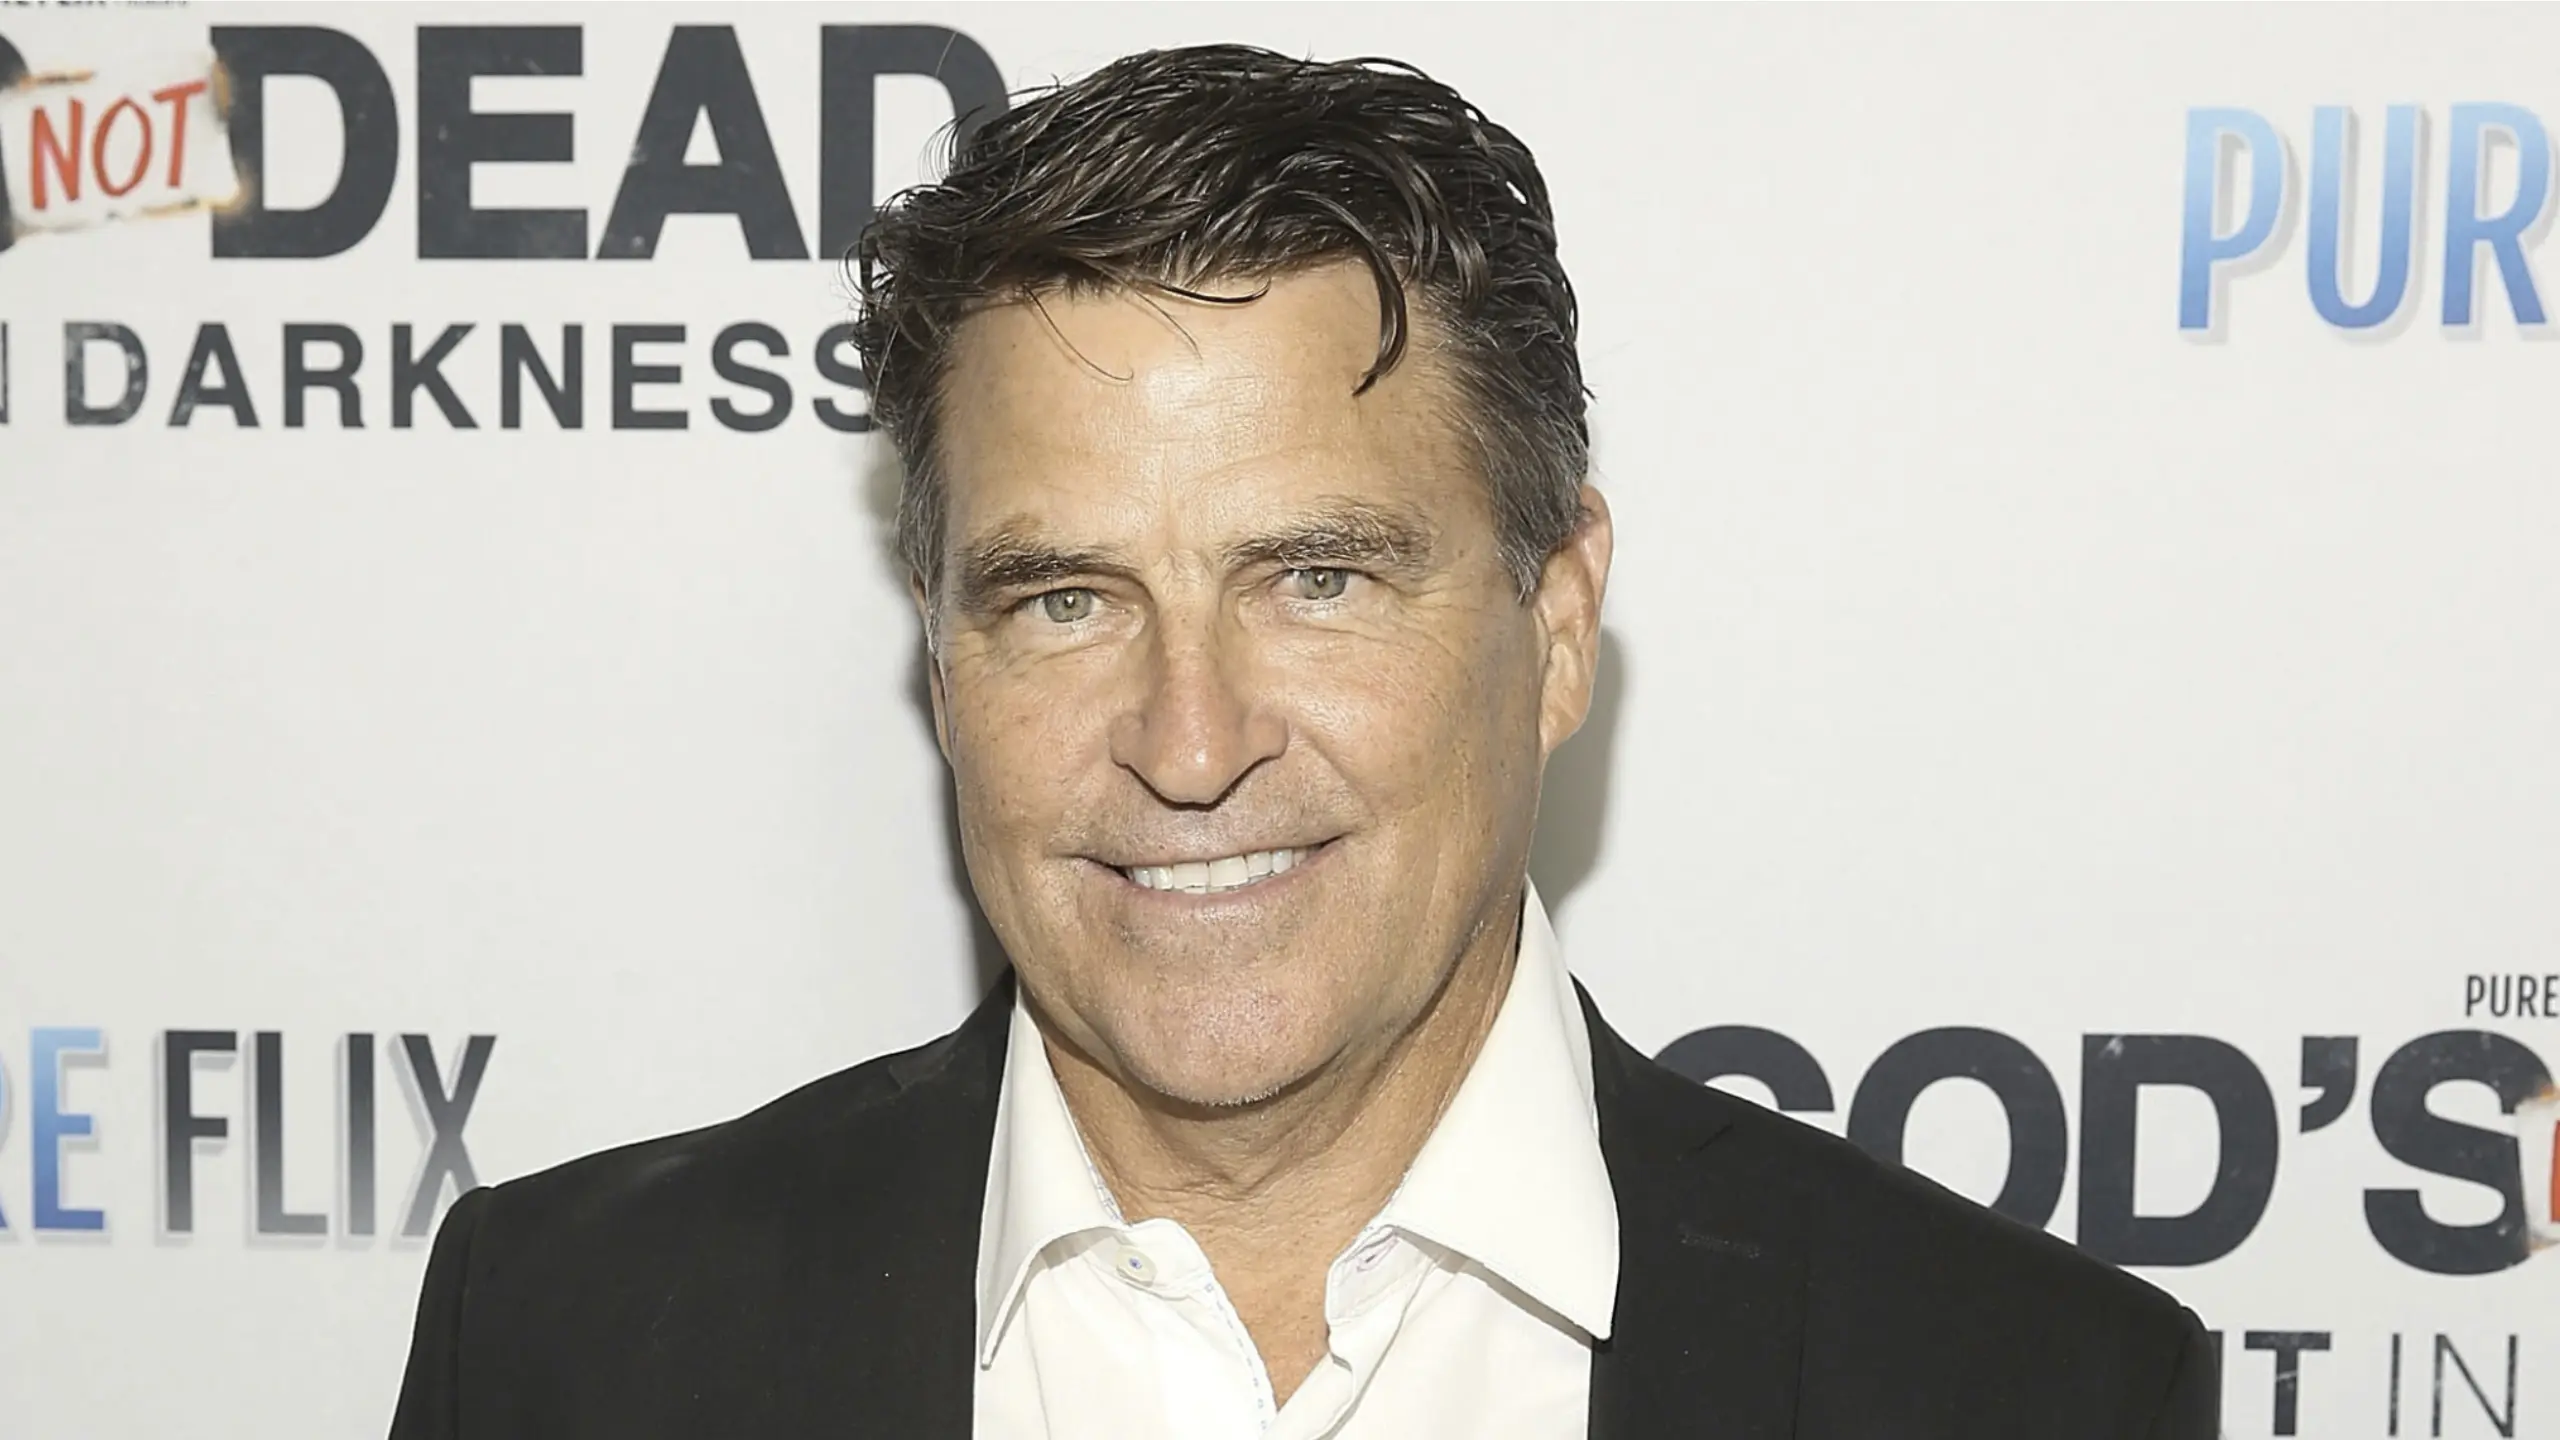 Ted McGinley: A Versatile Actor with a Long Career